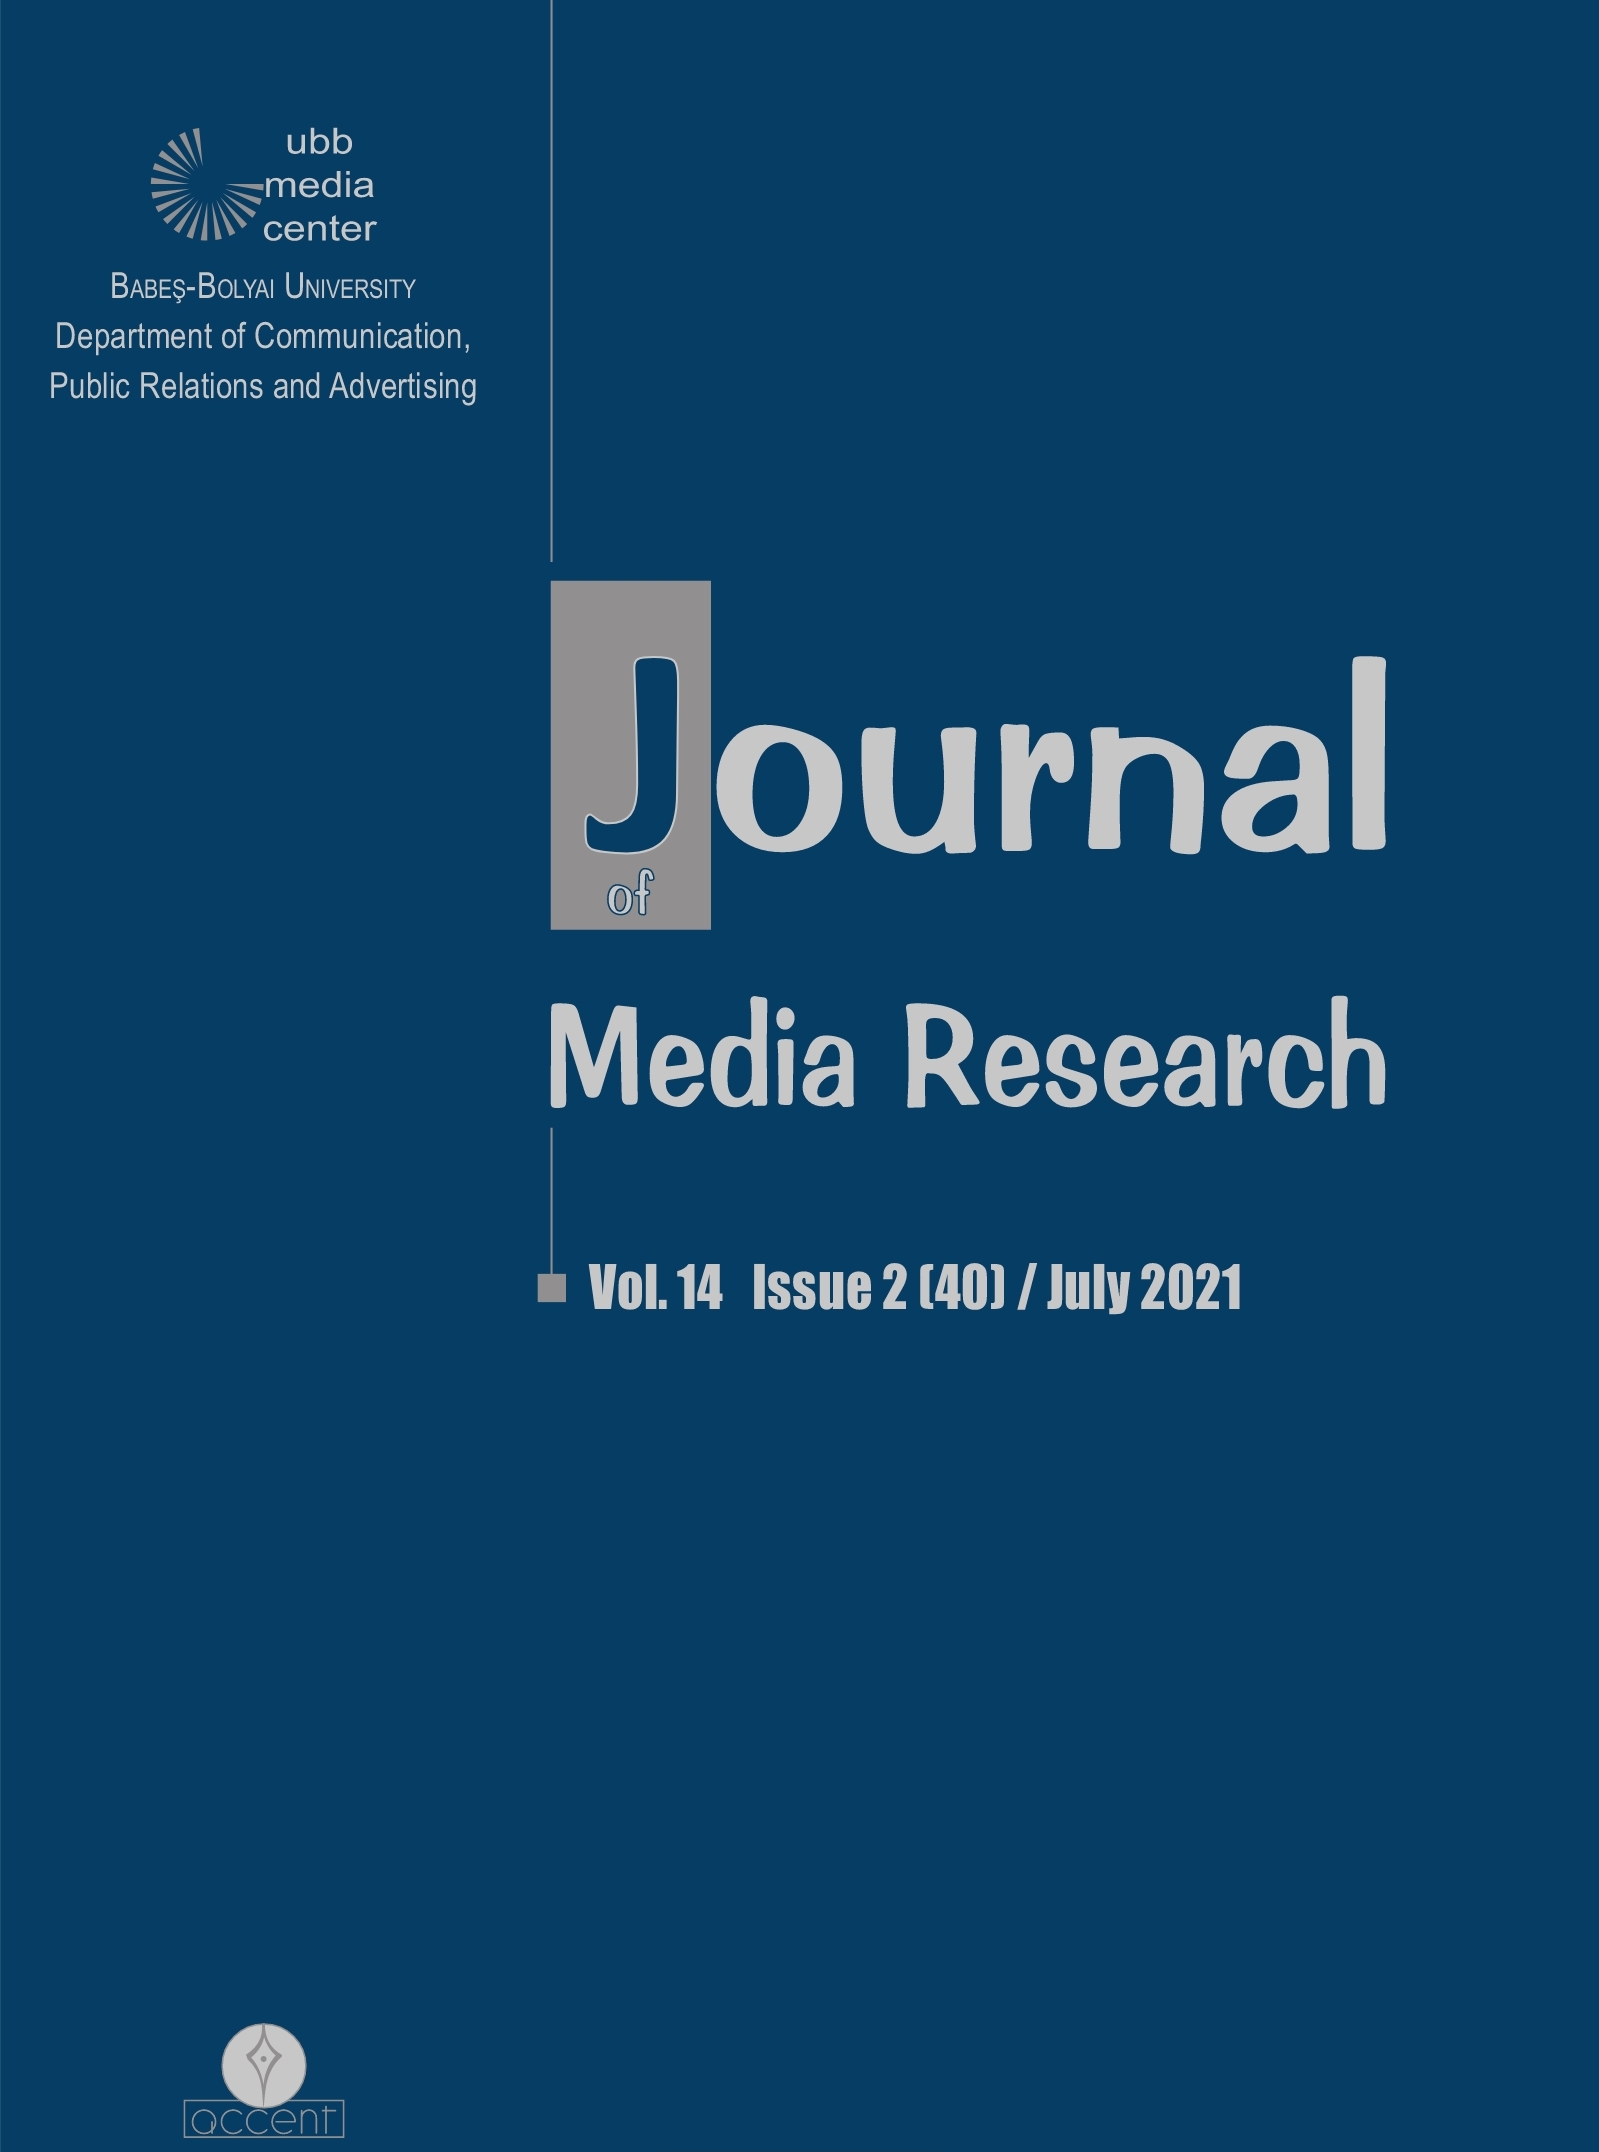 Sociodemographic Factors’ Influence on the Consumption and Assessment of COVID-19 Related Information - An International Web-Based Survey